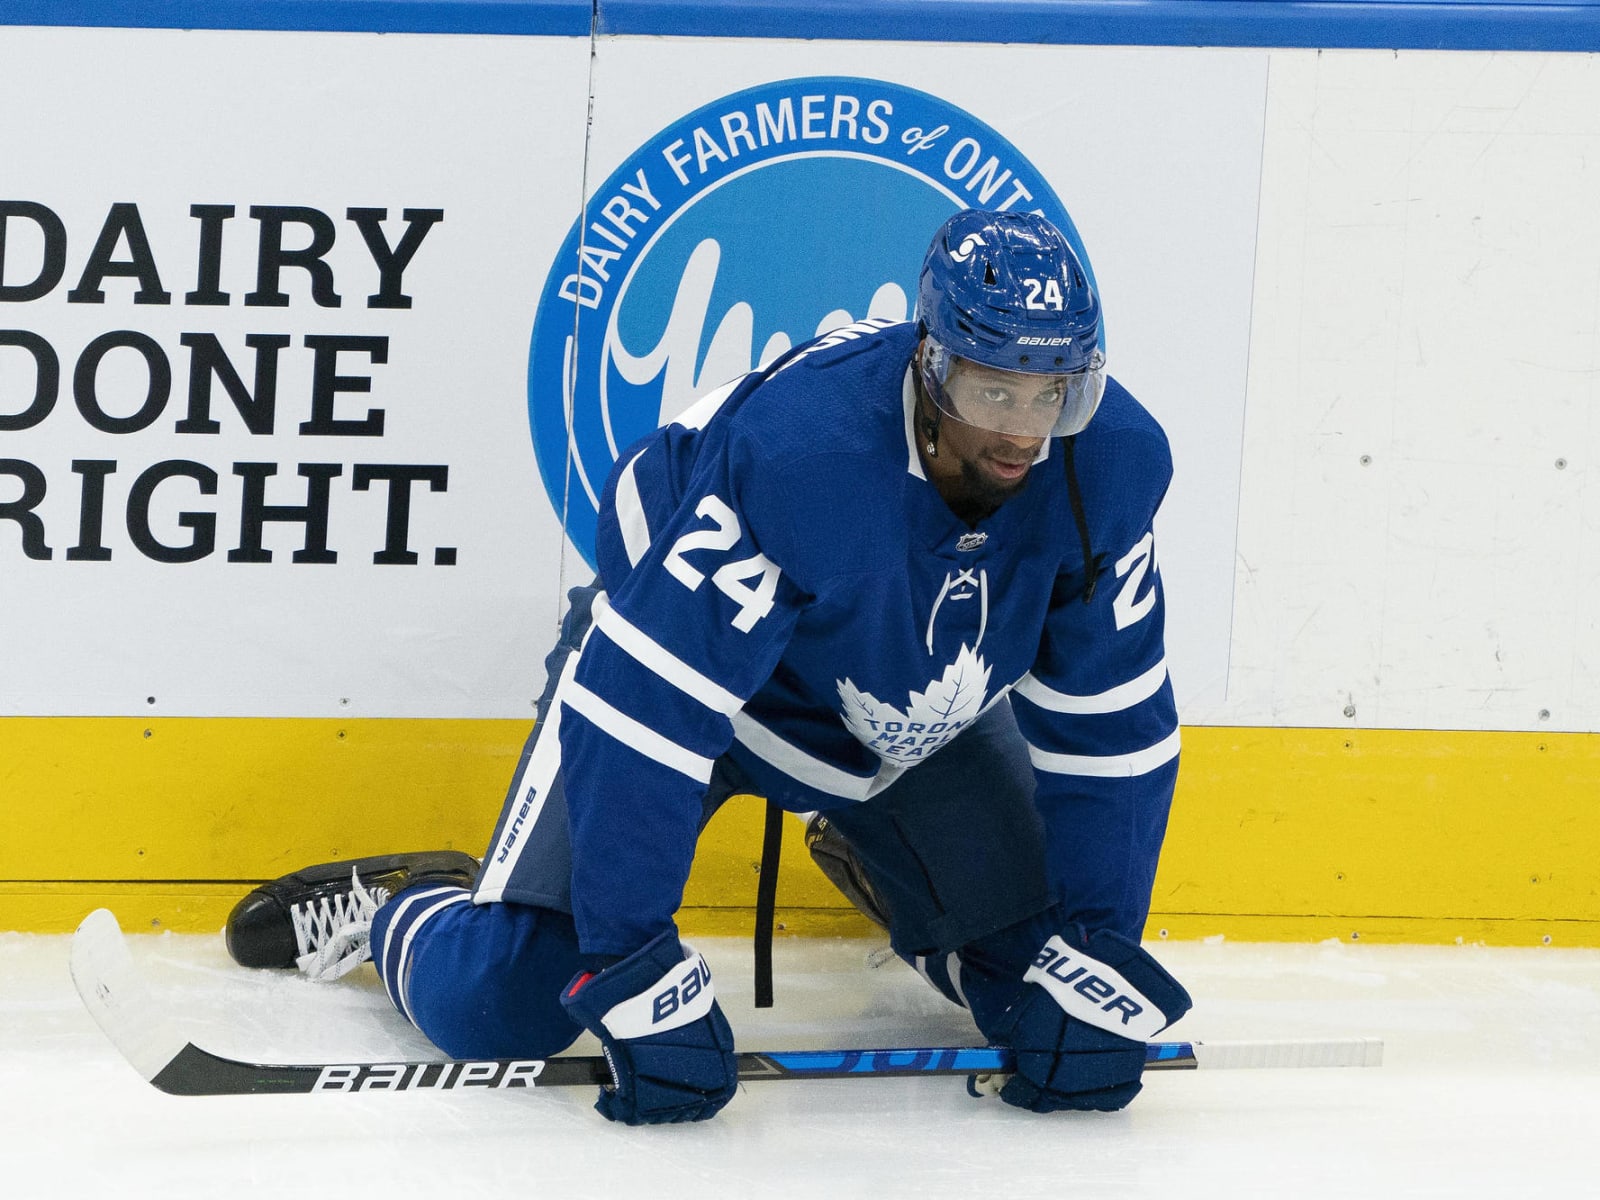 Toronto Maple Leafs winger Wayne Simmonds out 6 weeks with broken